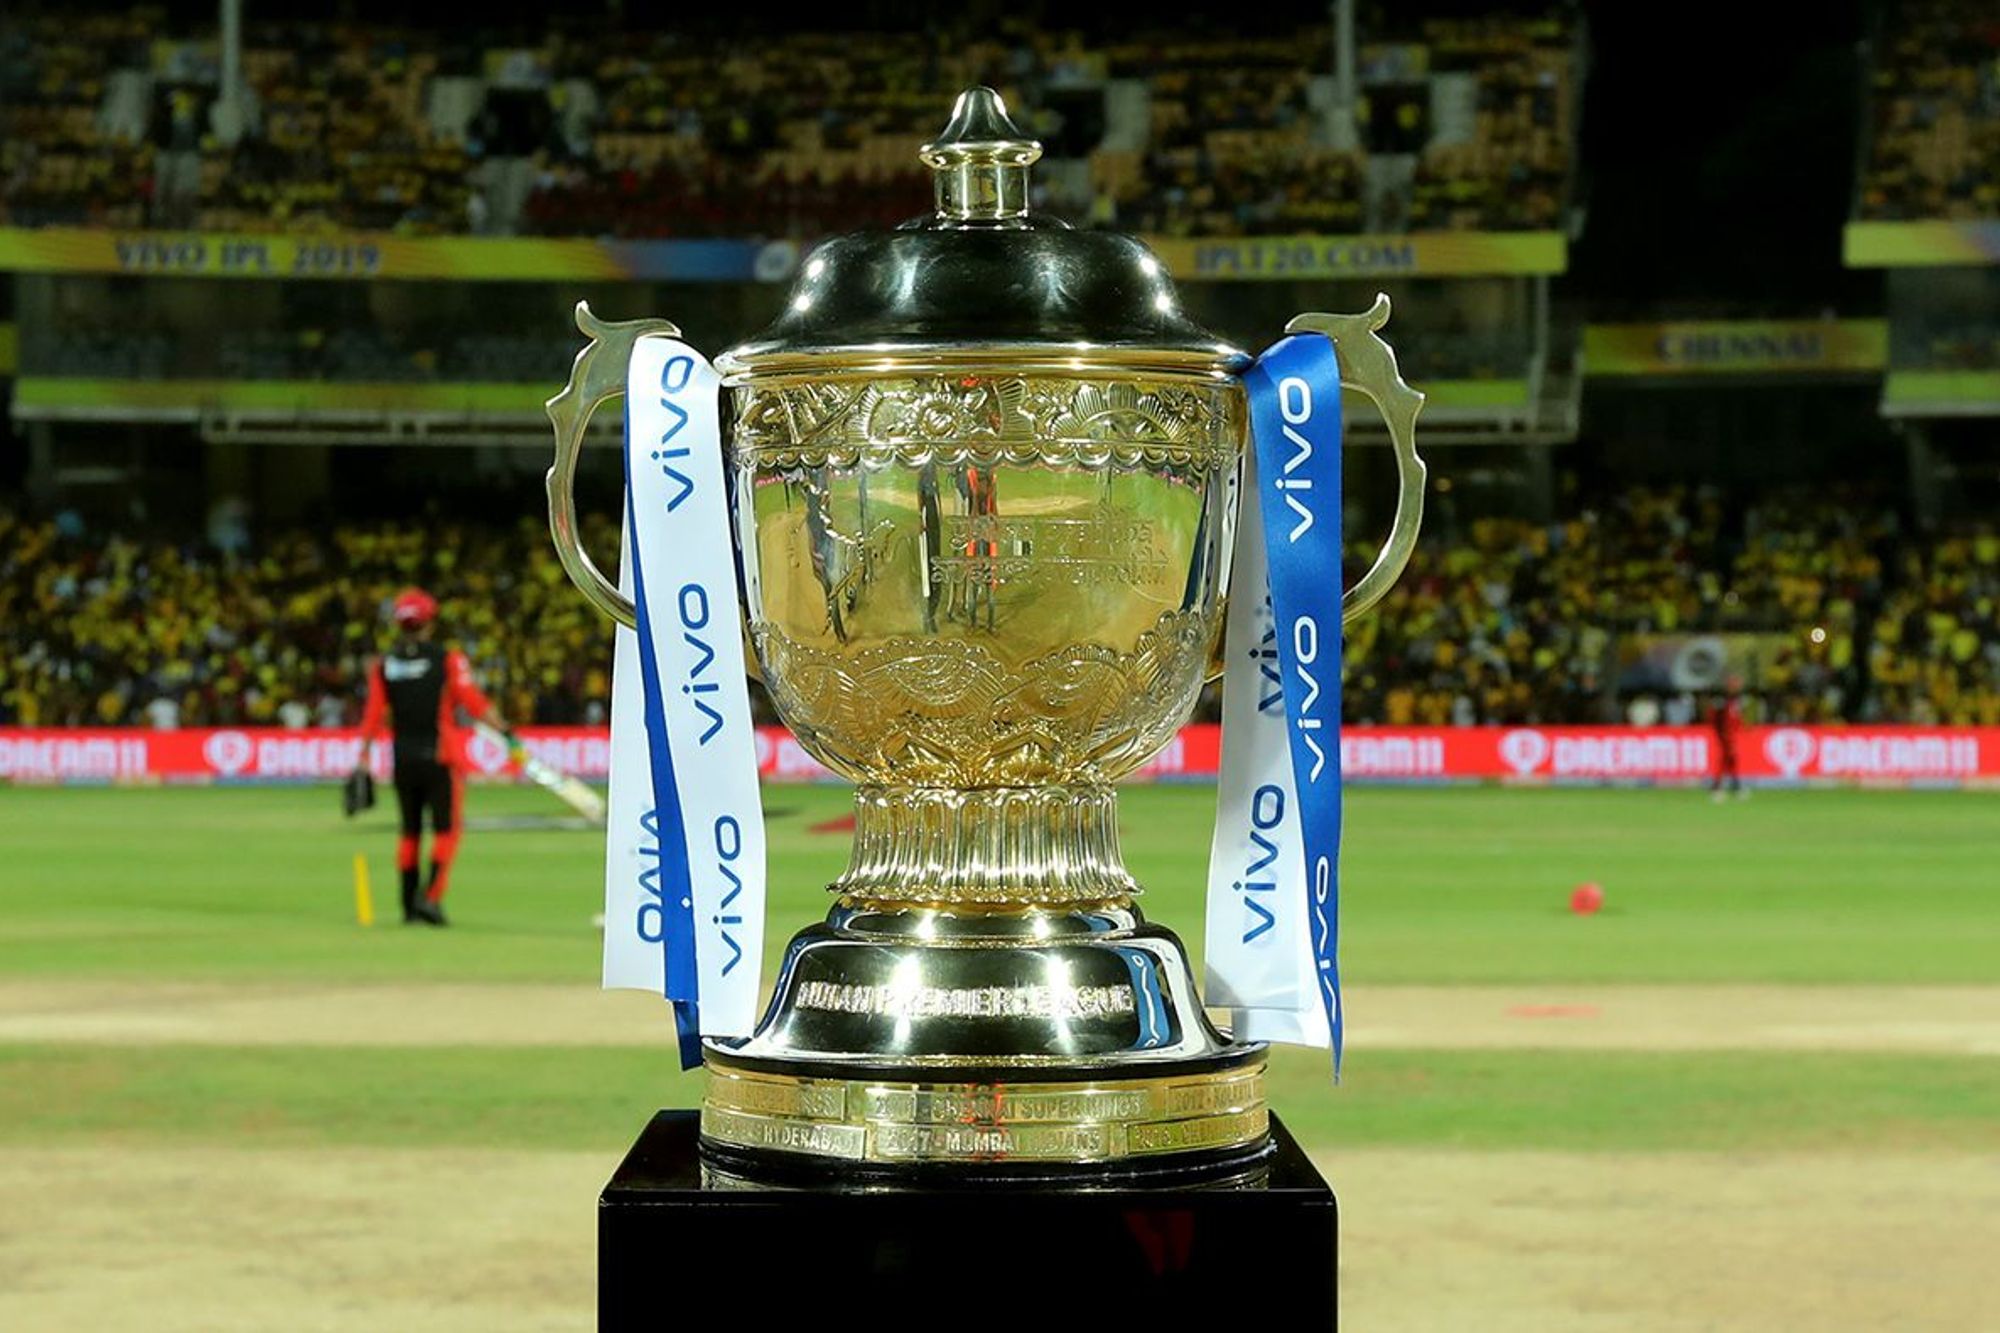 IPL 2020 suspended until further notice due to Covid-19